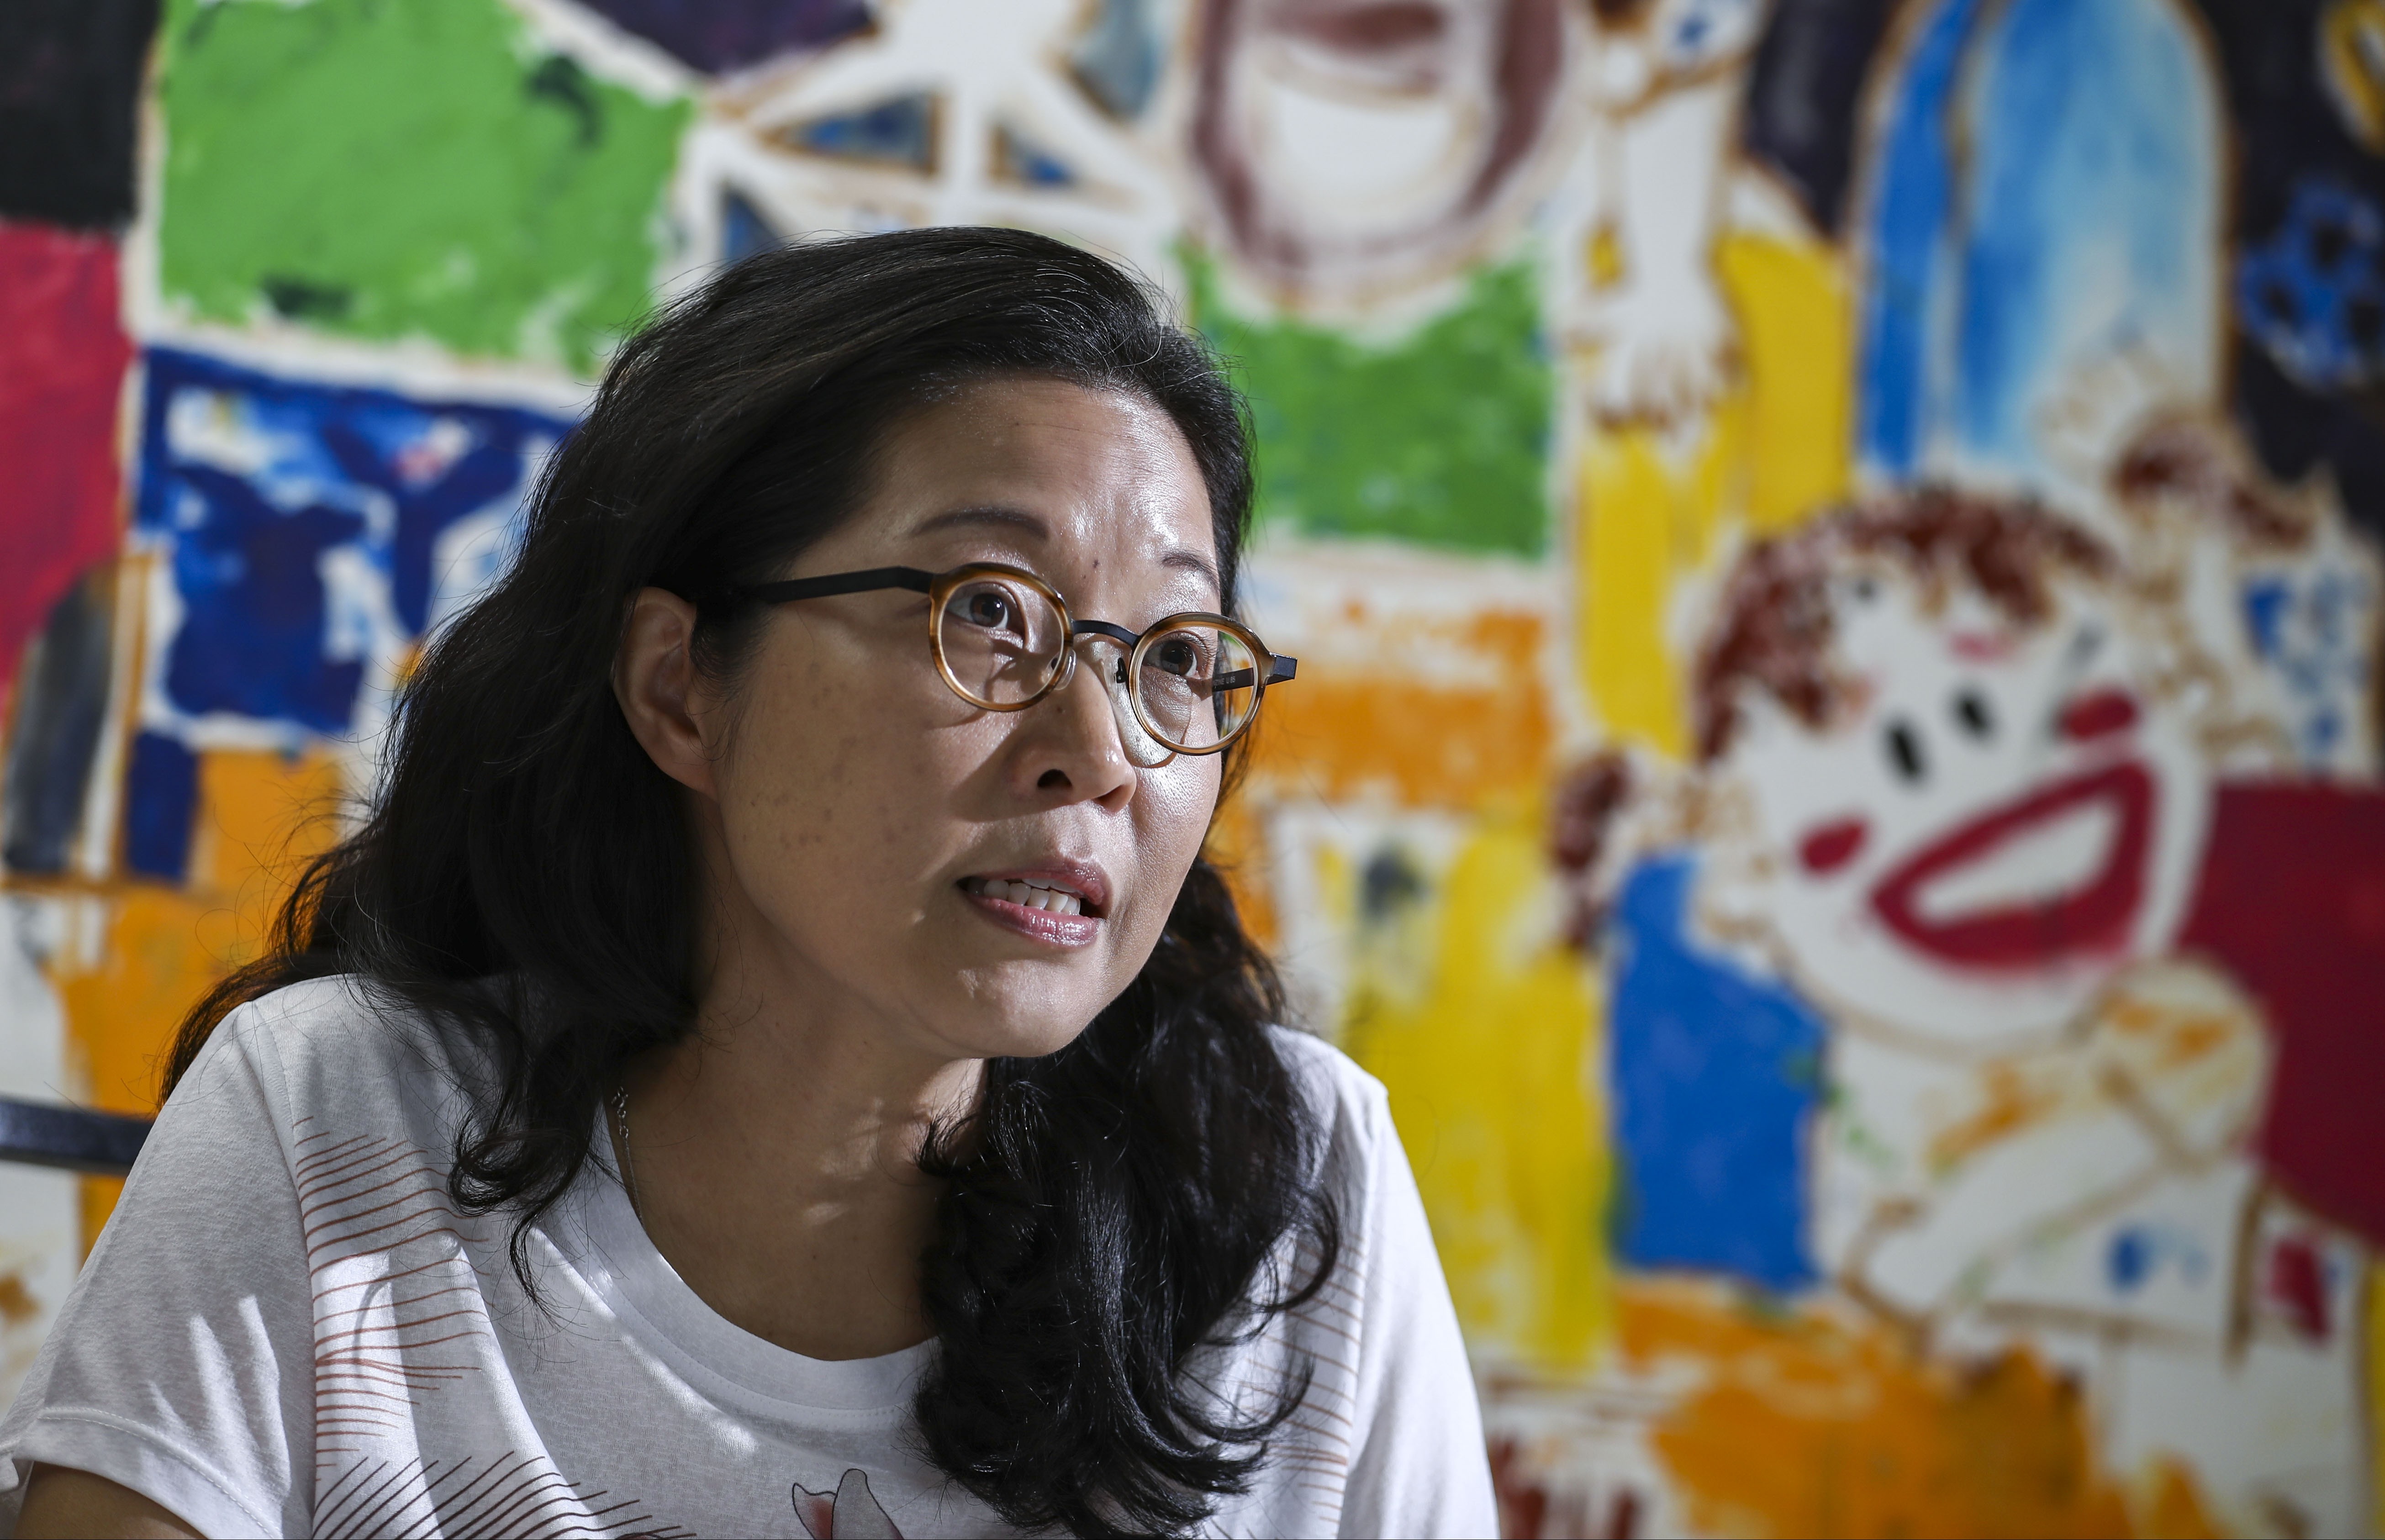 “In terms of racial discrimination, there has not been much progress”: Phyllis Cheung. Photo: Nora Tam